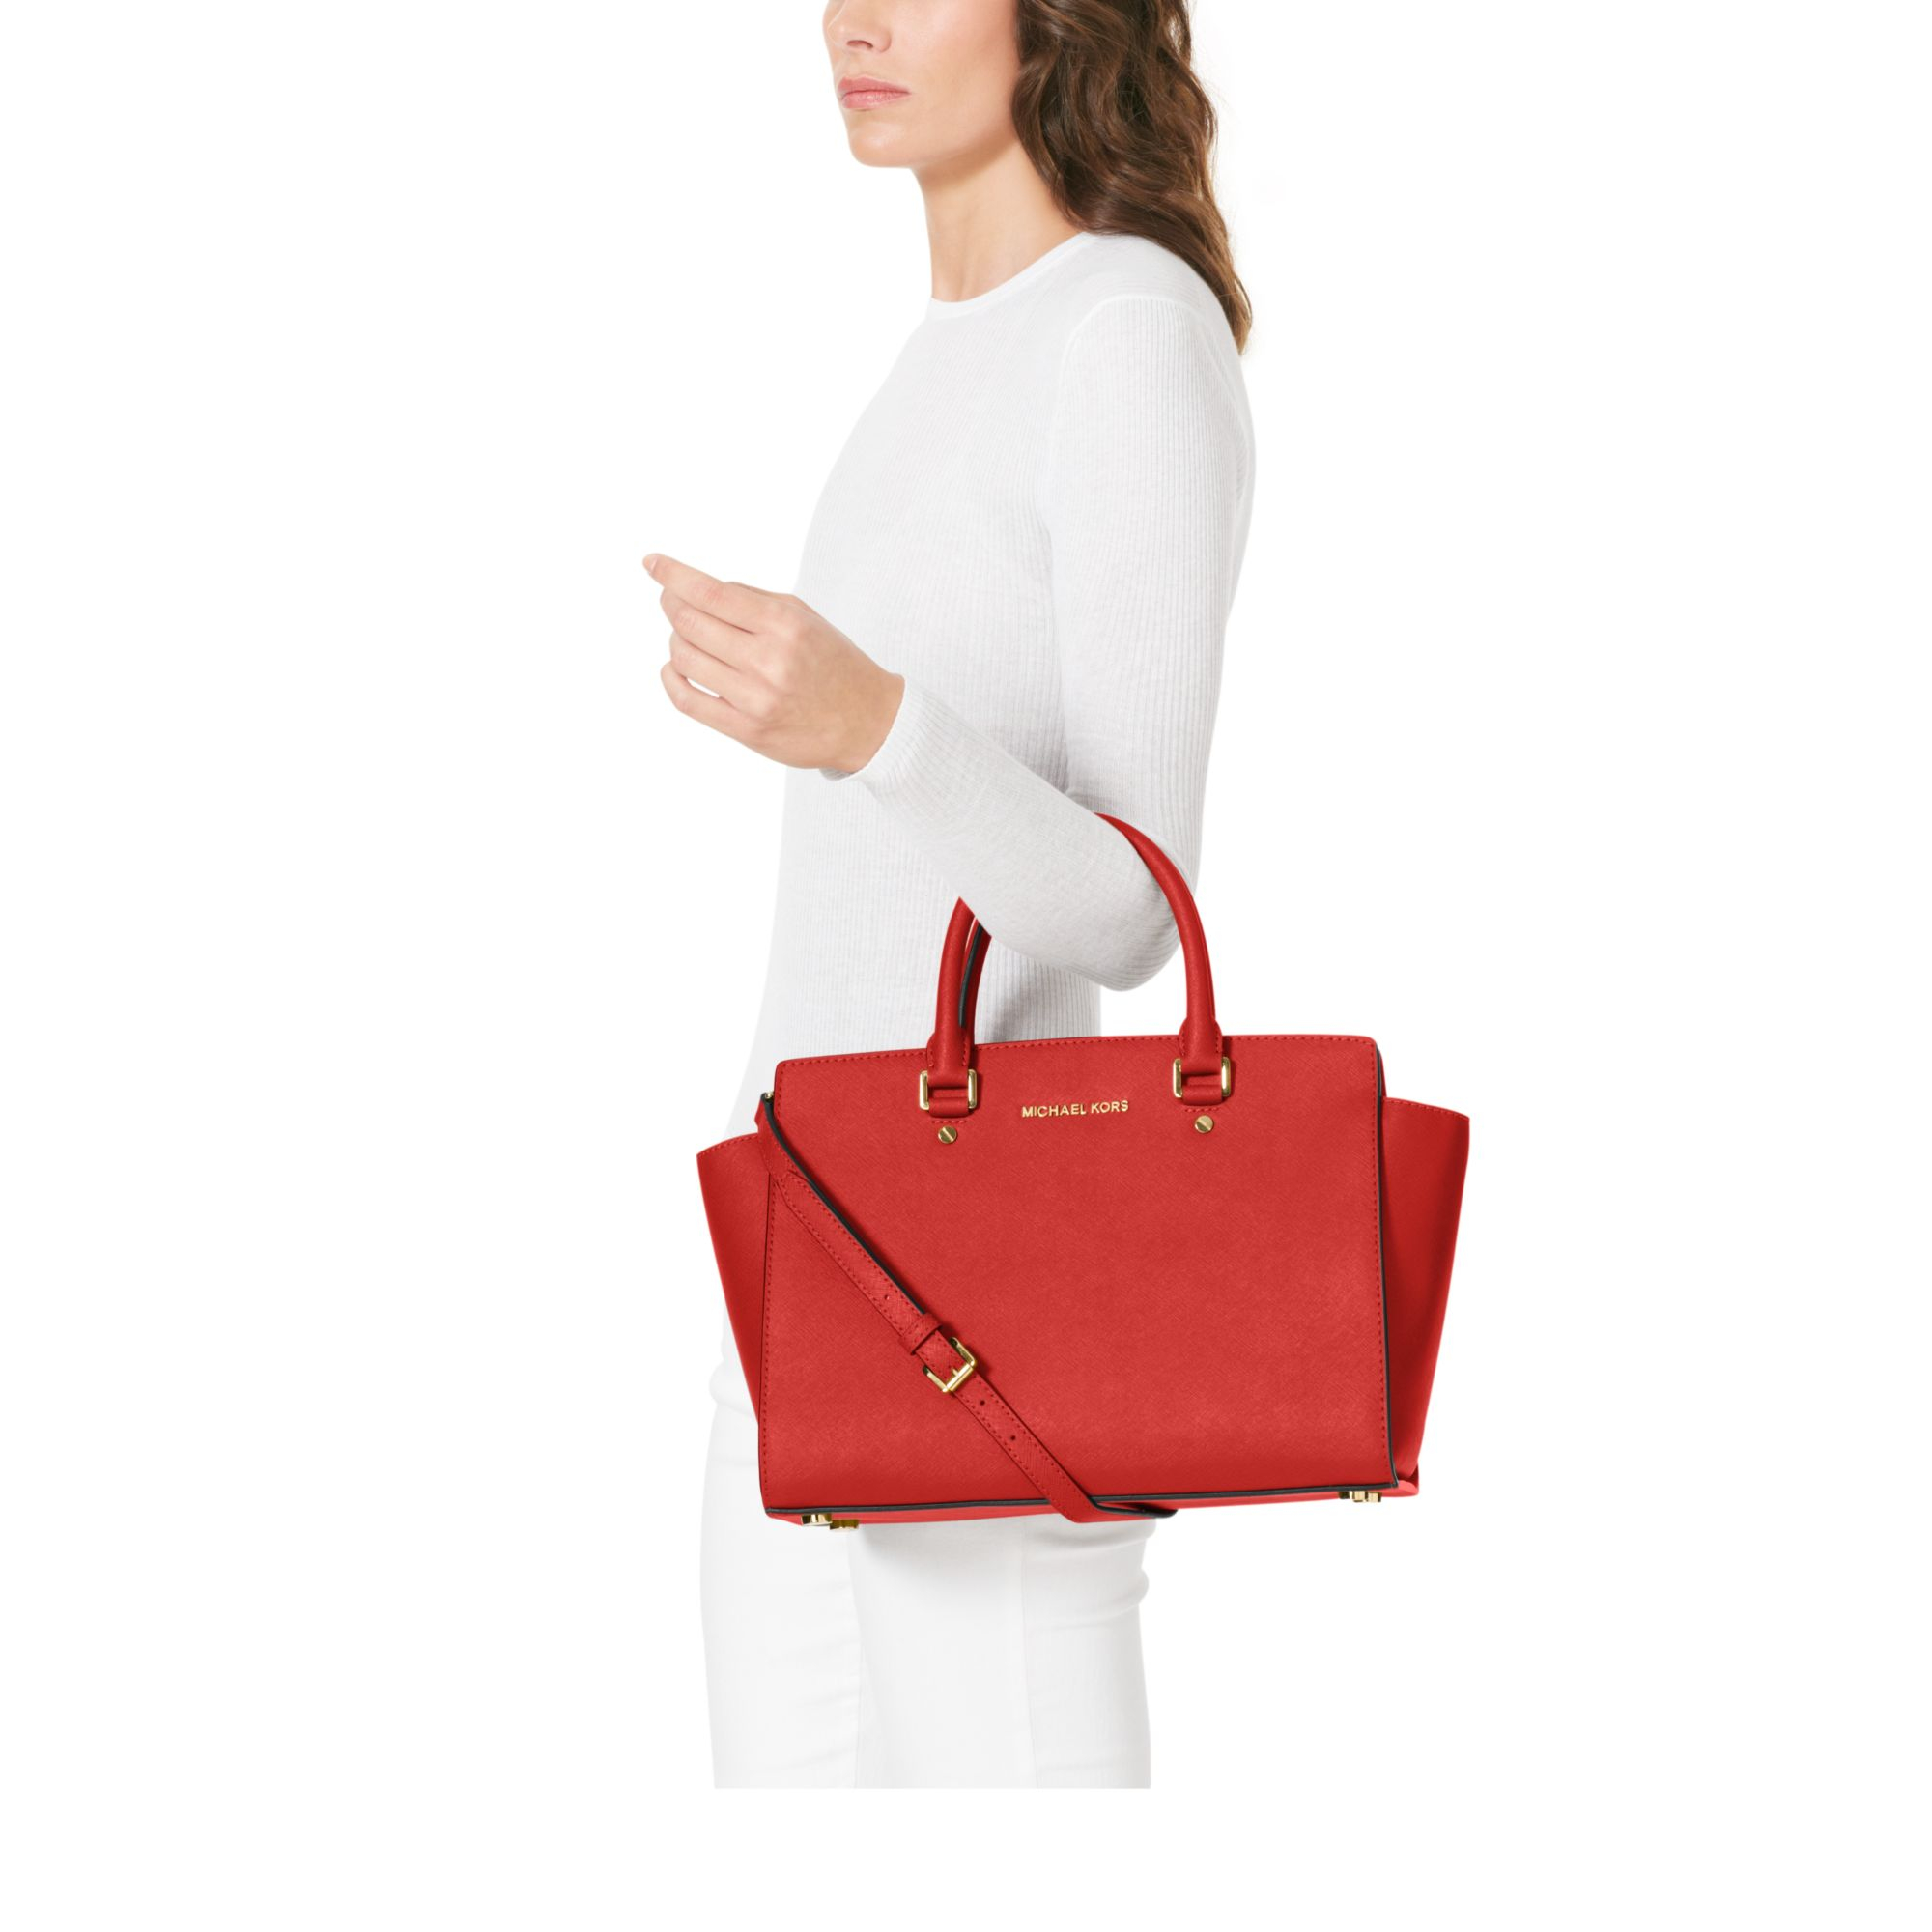 Michael Kors Selma Large Saffiano Leather Satchel in Red - Lyst